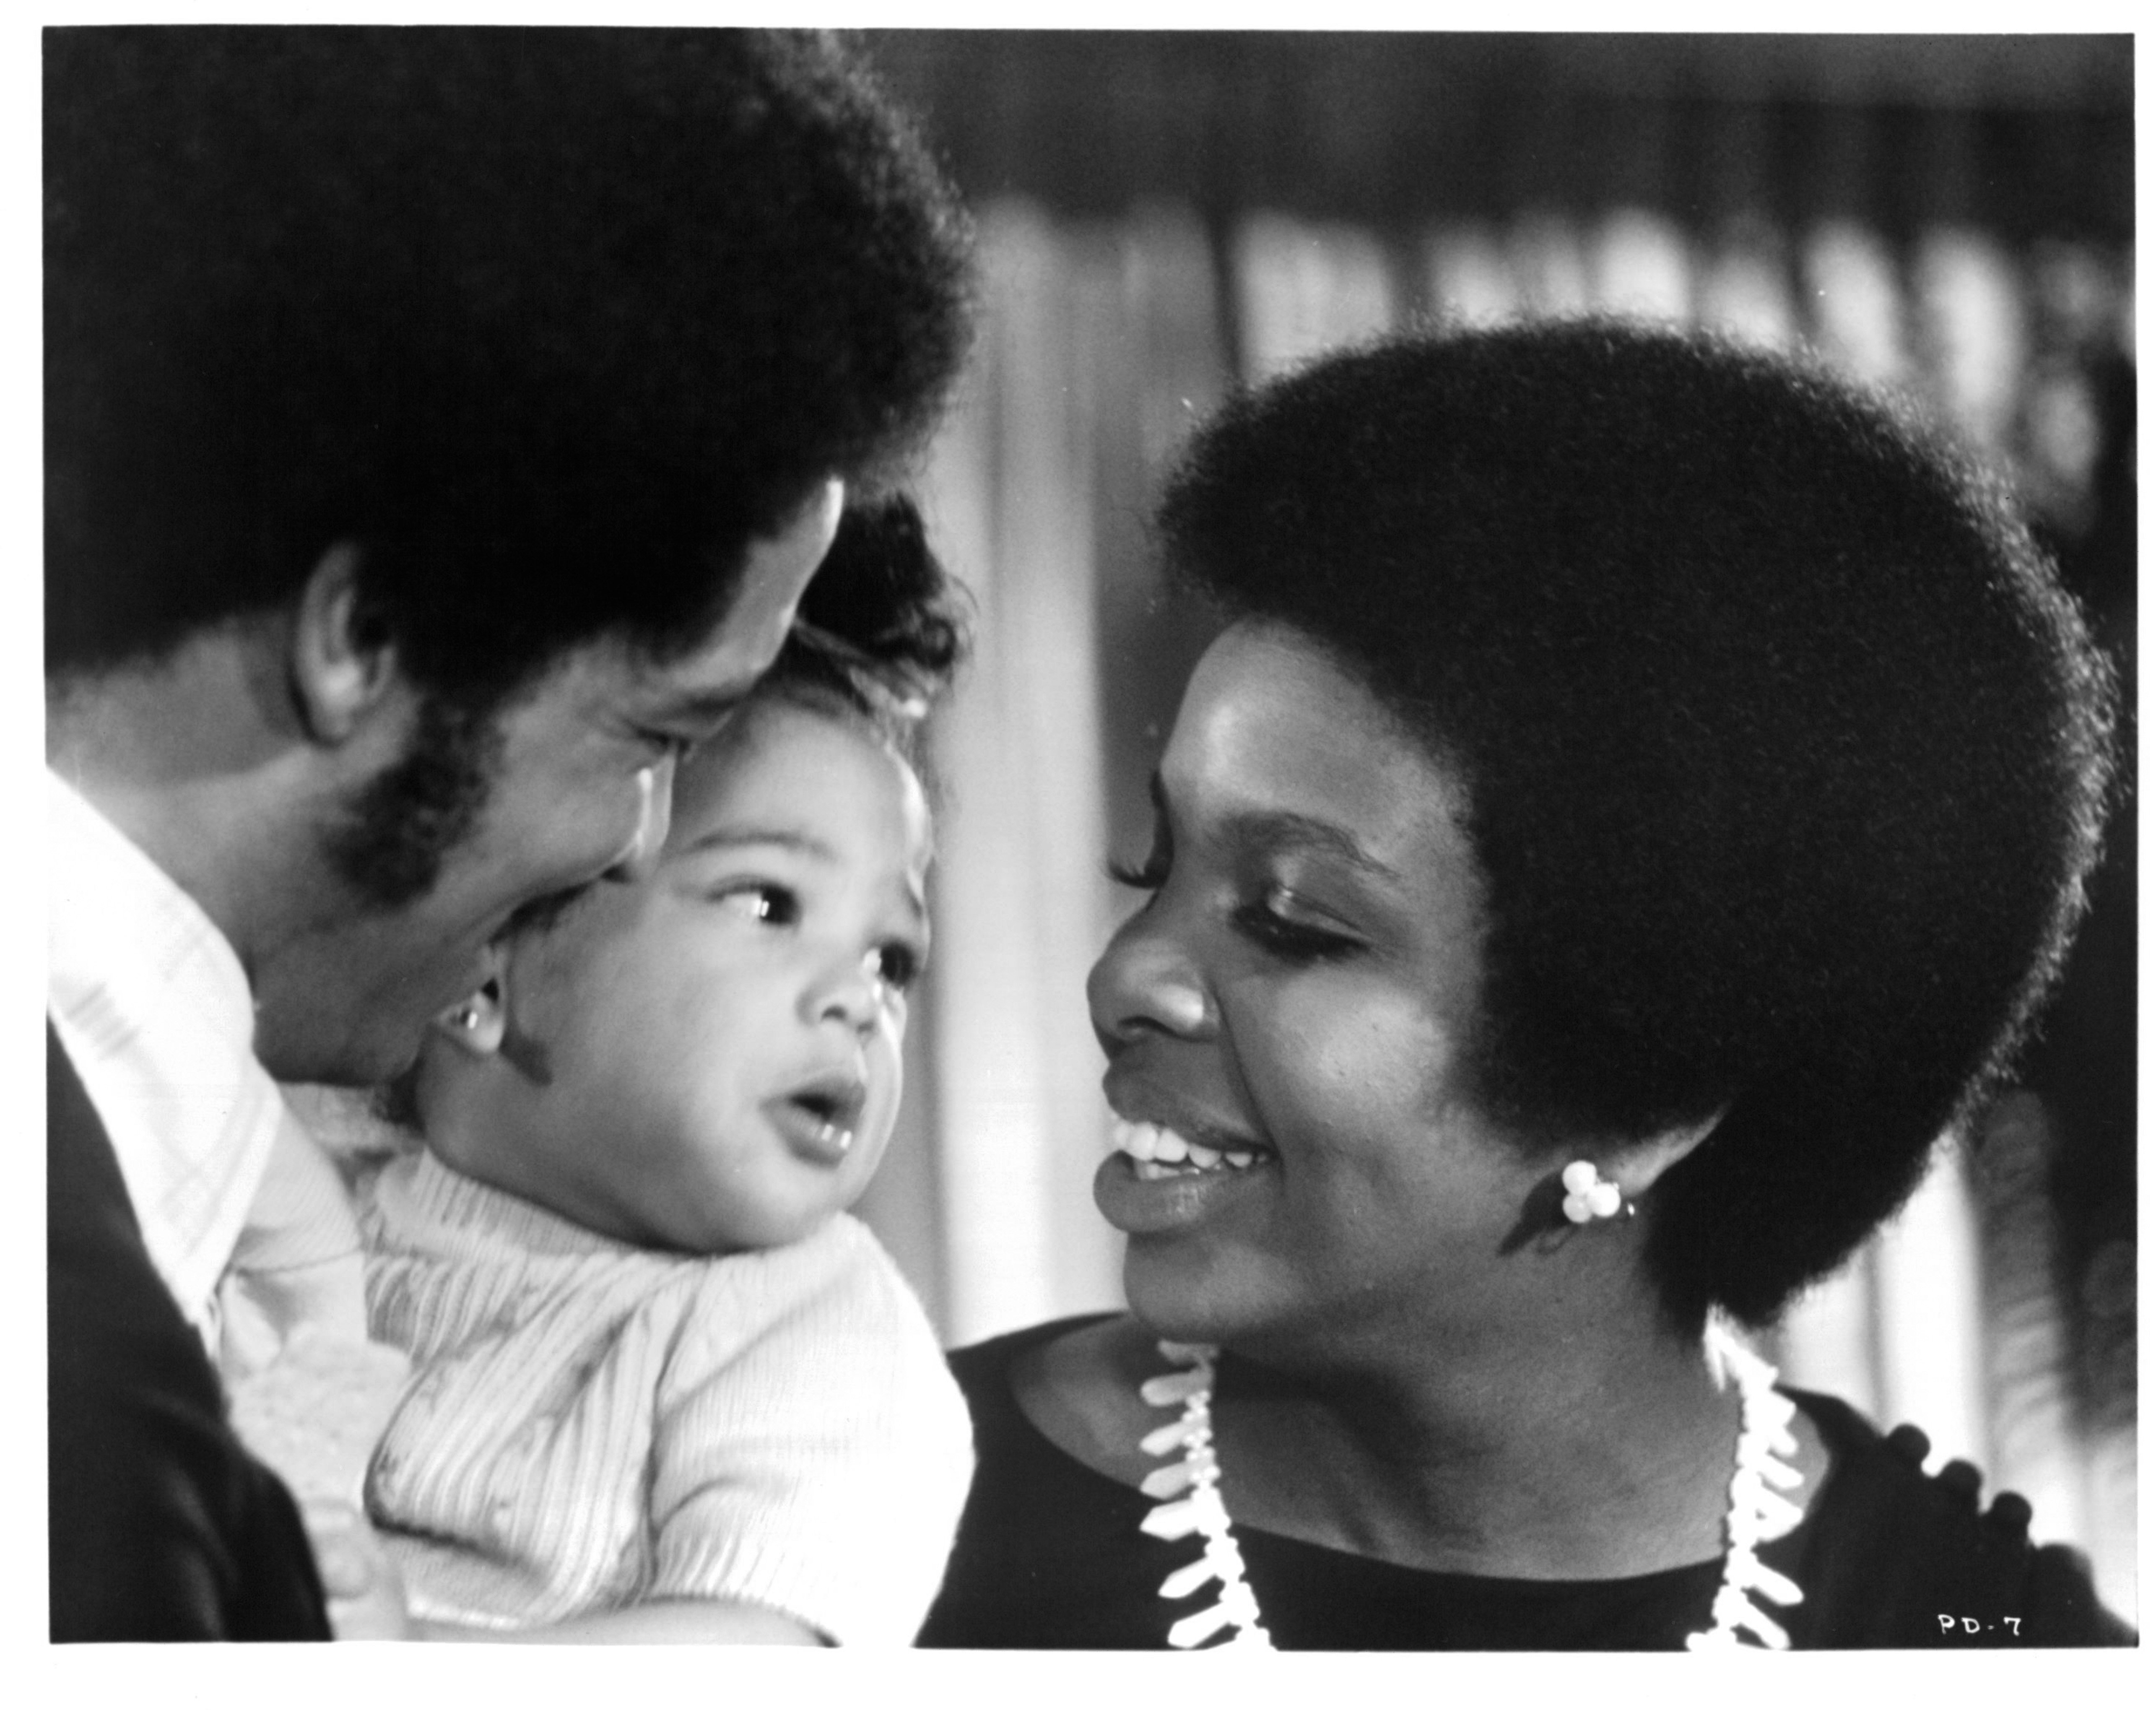 Barry Hankerson and Gladys Knight with a baby in a scene from the film "Pipe Dreams," in 1976. | Source: Getty Images